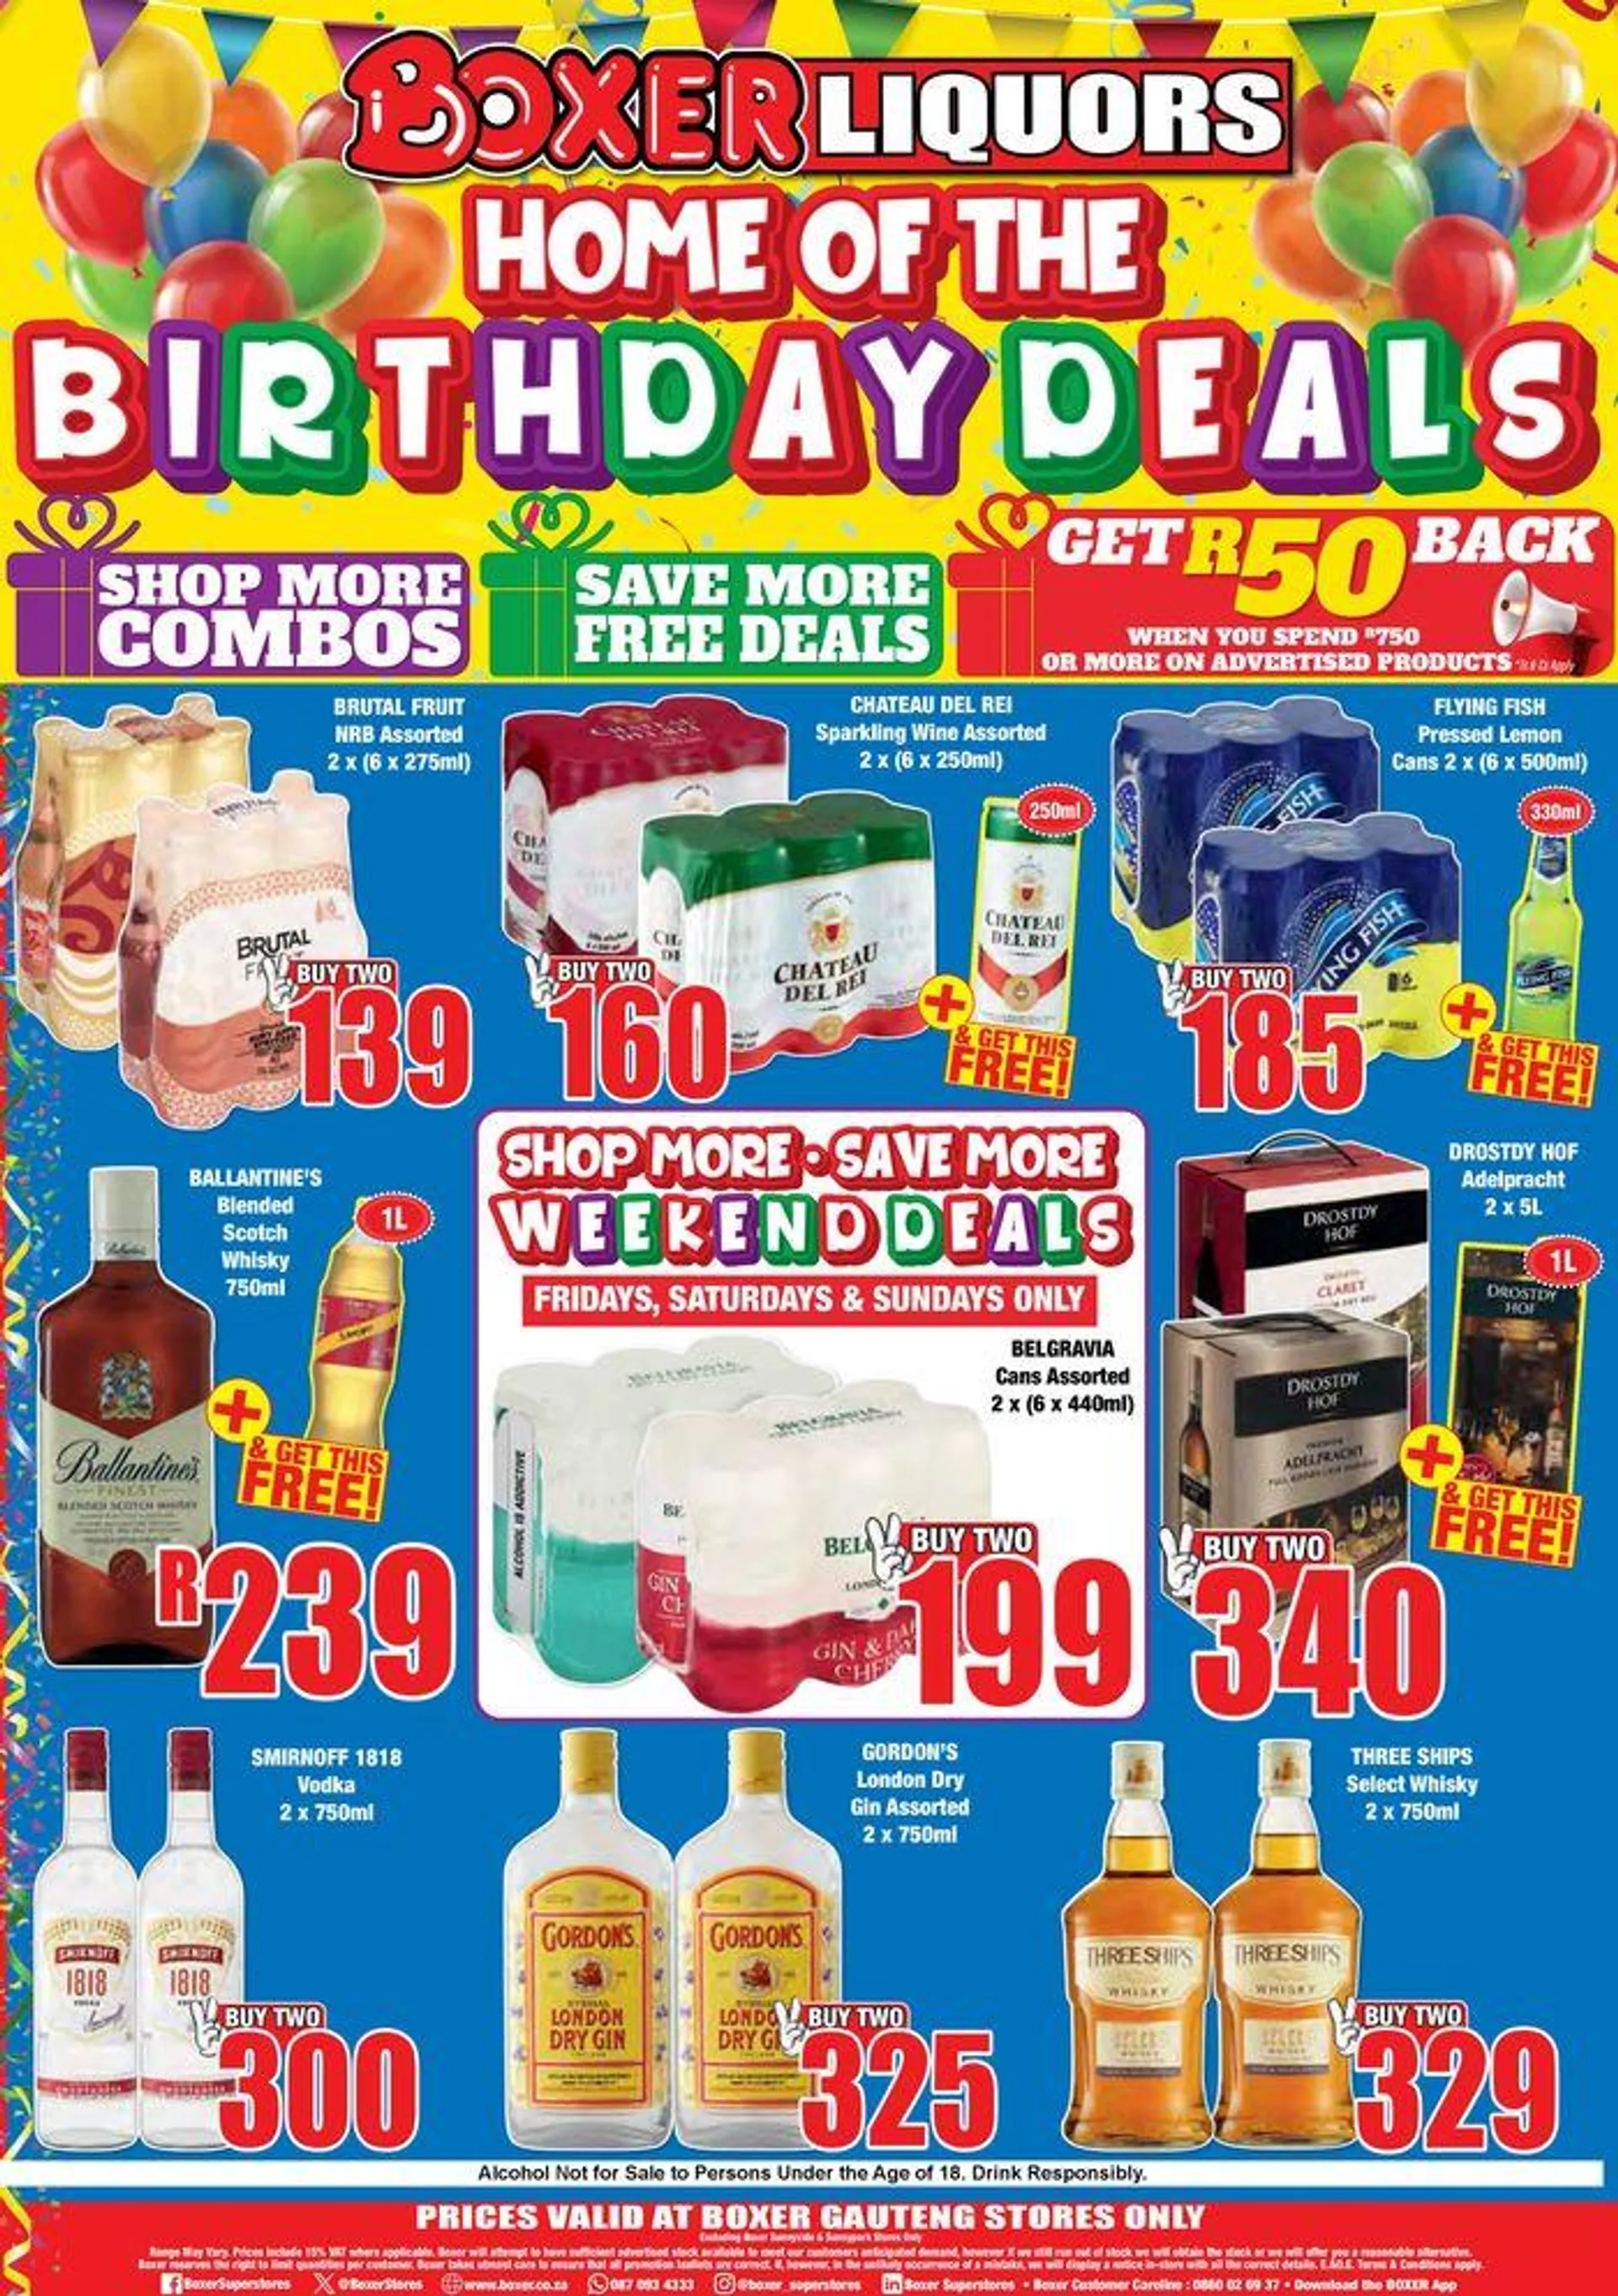 HOME OF THE BIRTHDAY DEAL - 12